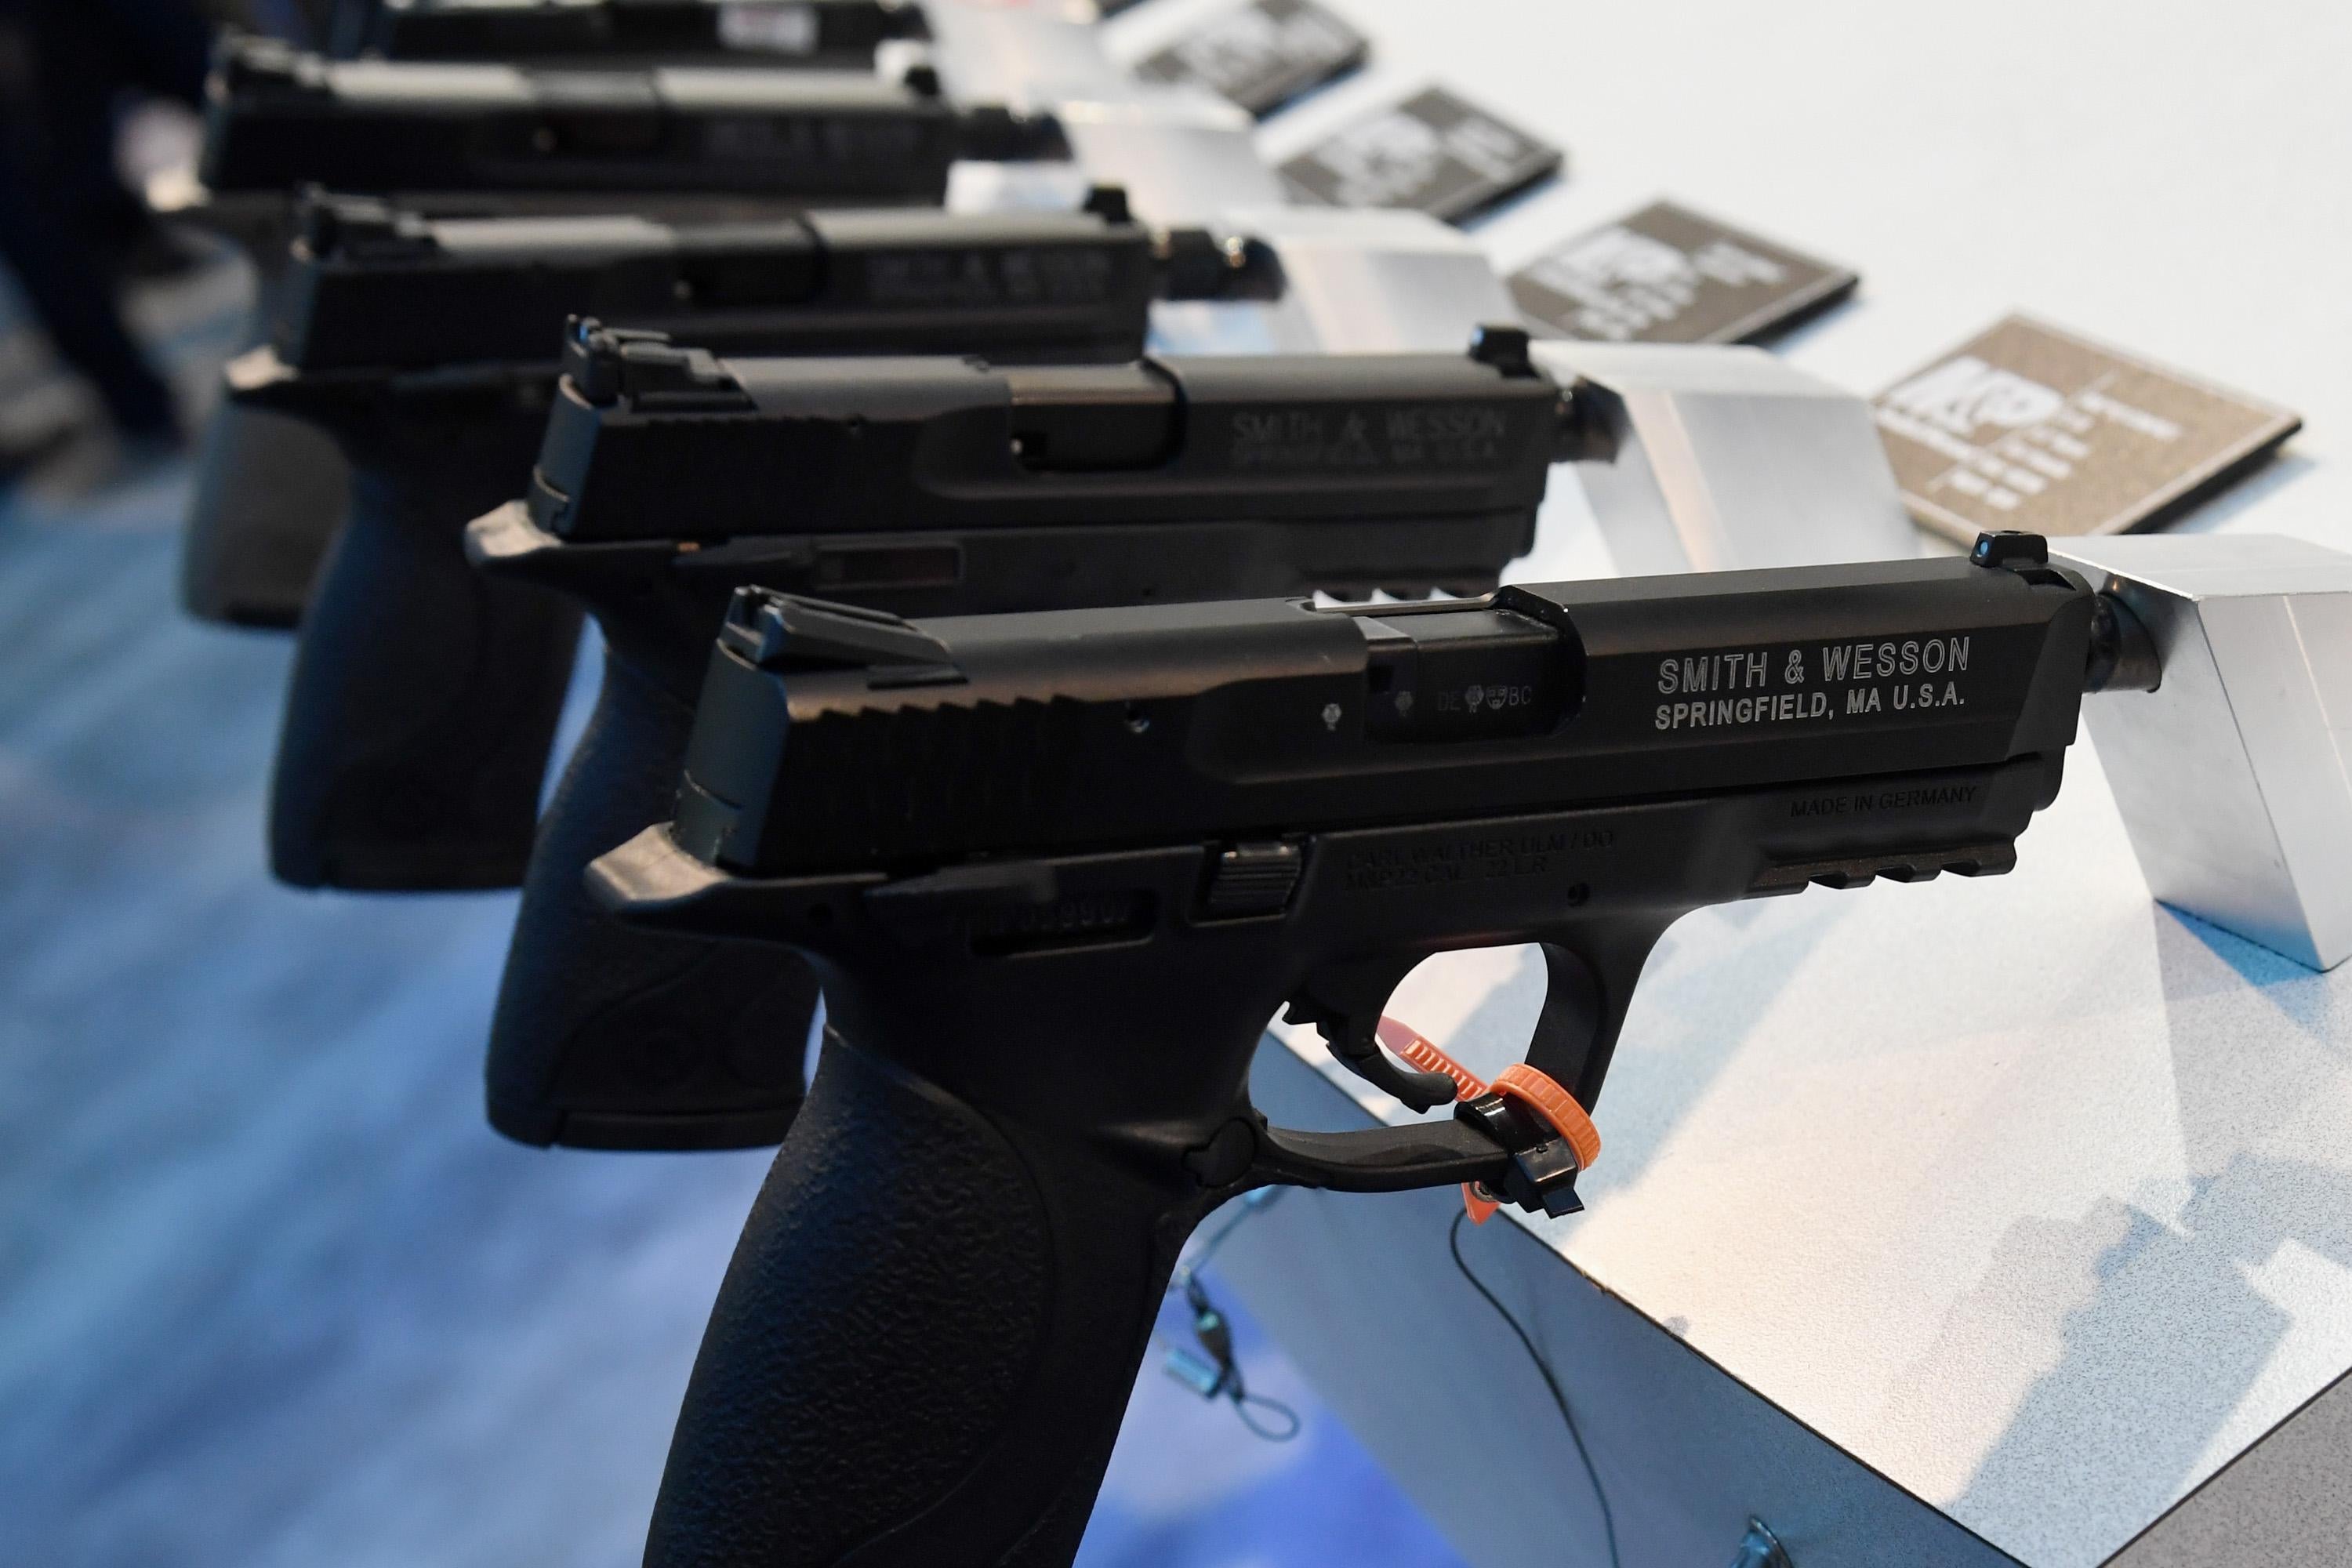 LAS VEGAS, NV - JANUARY 23:  Handguns are displayed at the Smith & Wesson booth at the 2018 National Shooting Sports Foundation's Shooting, Hunting, Outdoor Trade (SHOT) Show at the Sands Expo and Convention Center on January 23, 2018 in Las Vegas, Nevada. The SHOT Show, the world's largest annual trade show for shooting, hunting and law enforcement professionals, runs through January 26 and is expected to feature about 1,600 exhibitors showing off their latest products and services to more than 60,000 attendees.  (Photo by Ethan Miller/Getty Images)